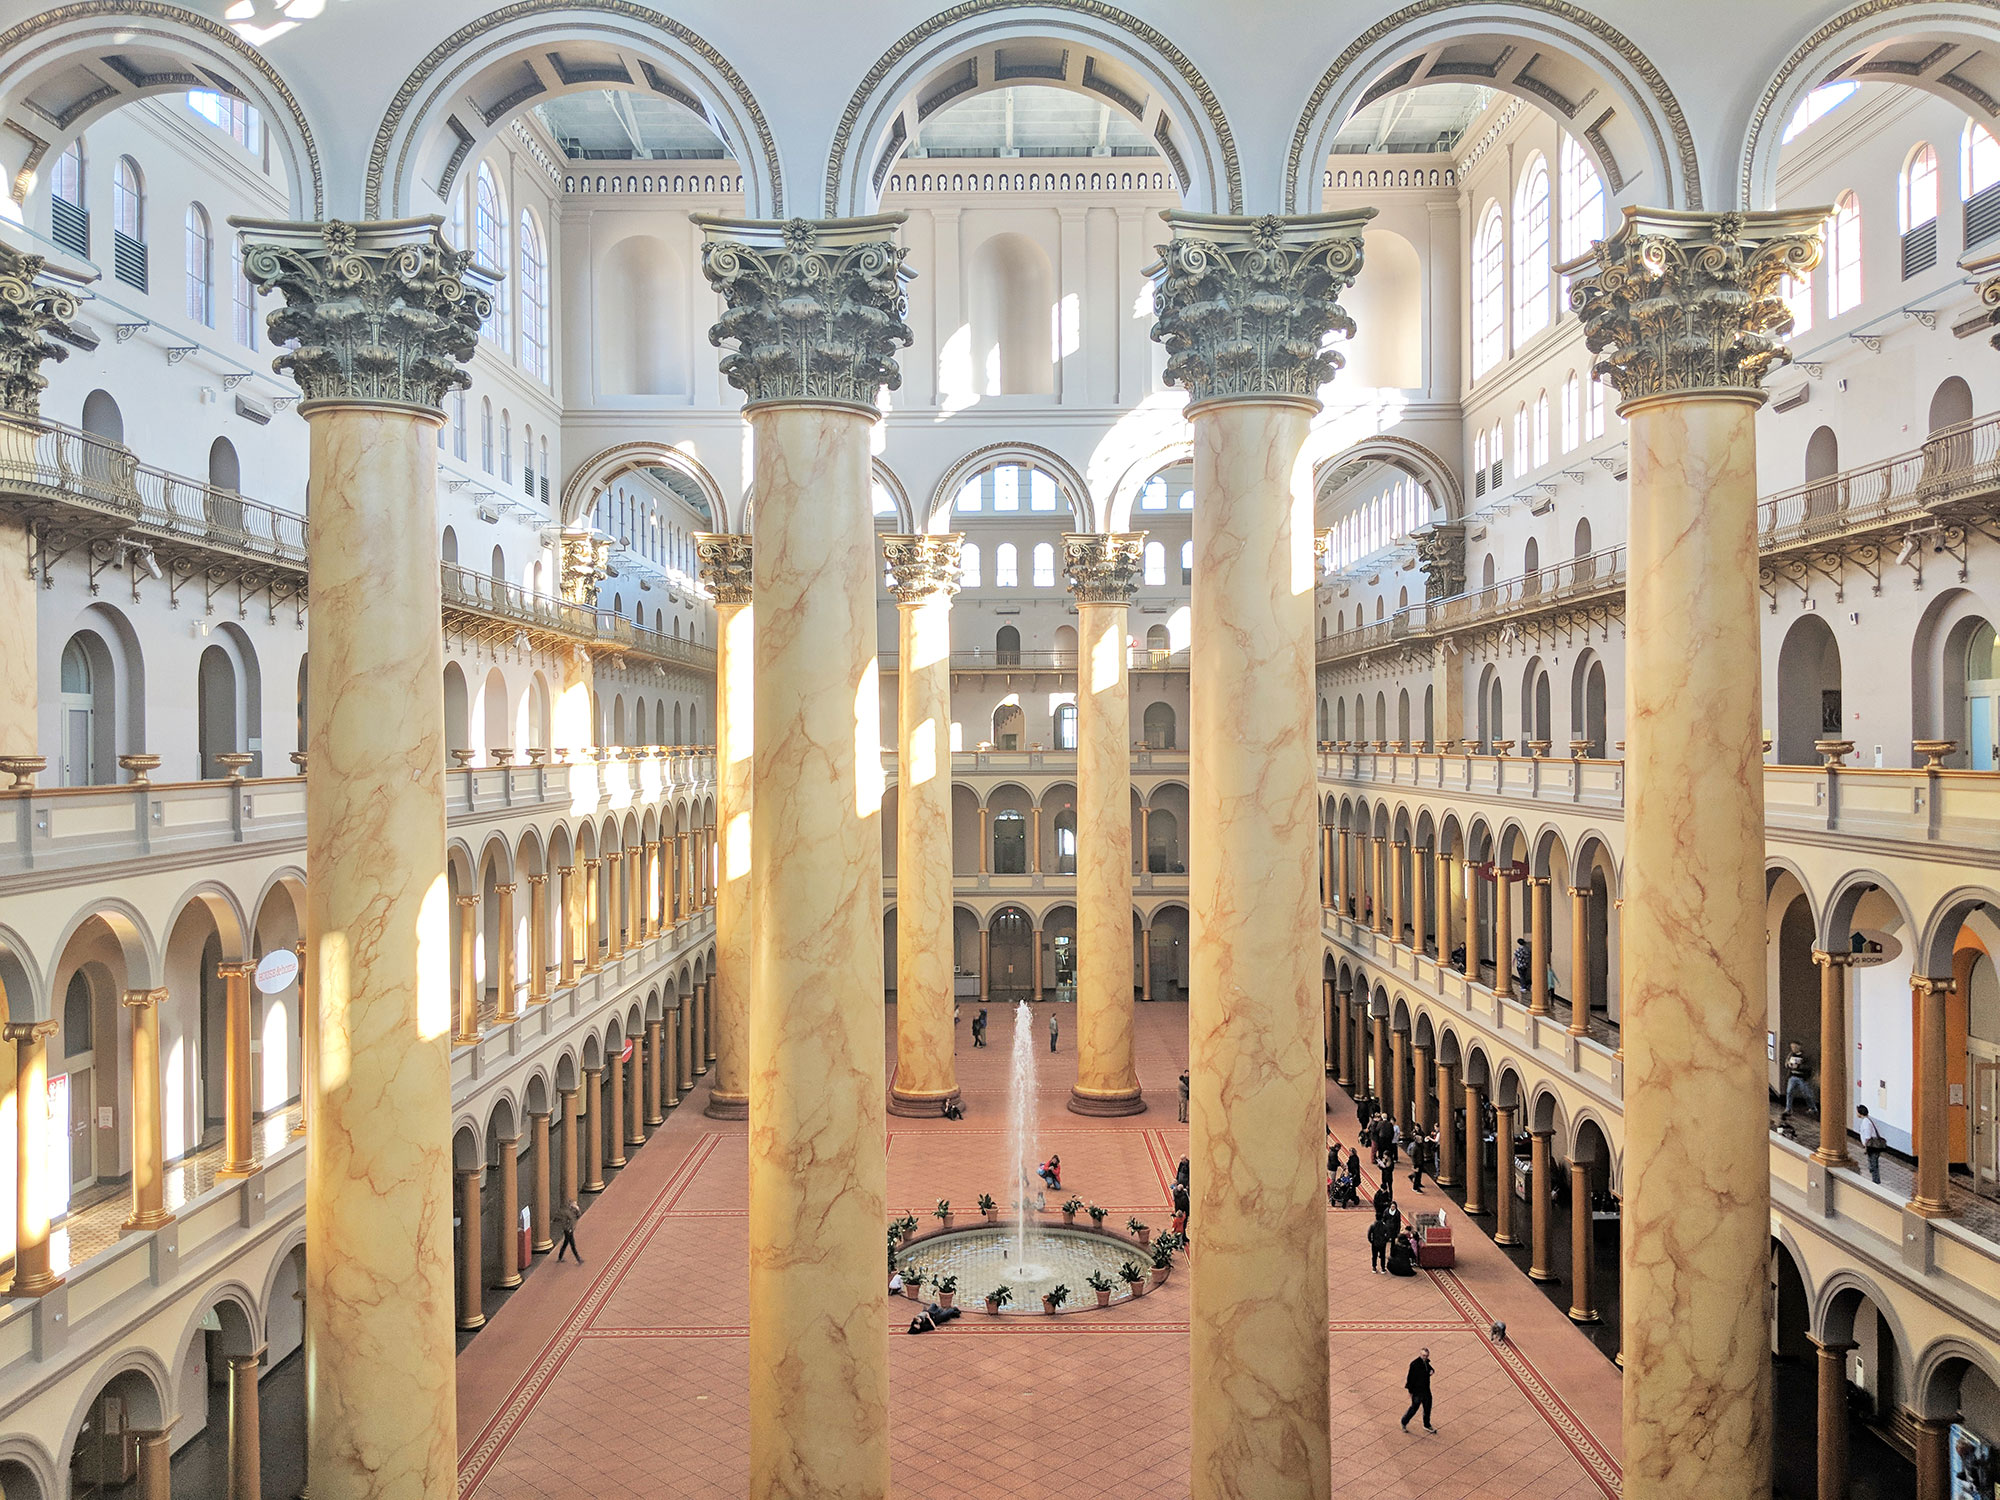 The interior courtyard of the National Building Museum in Washington D.C.